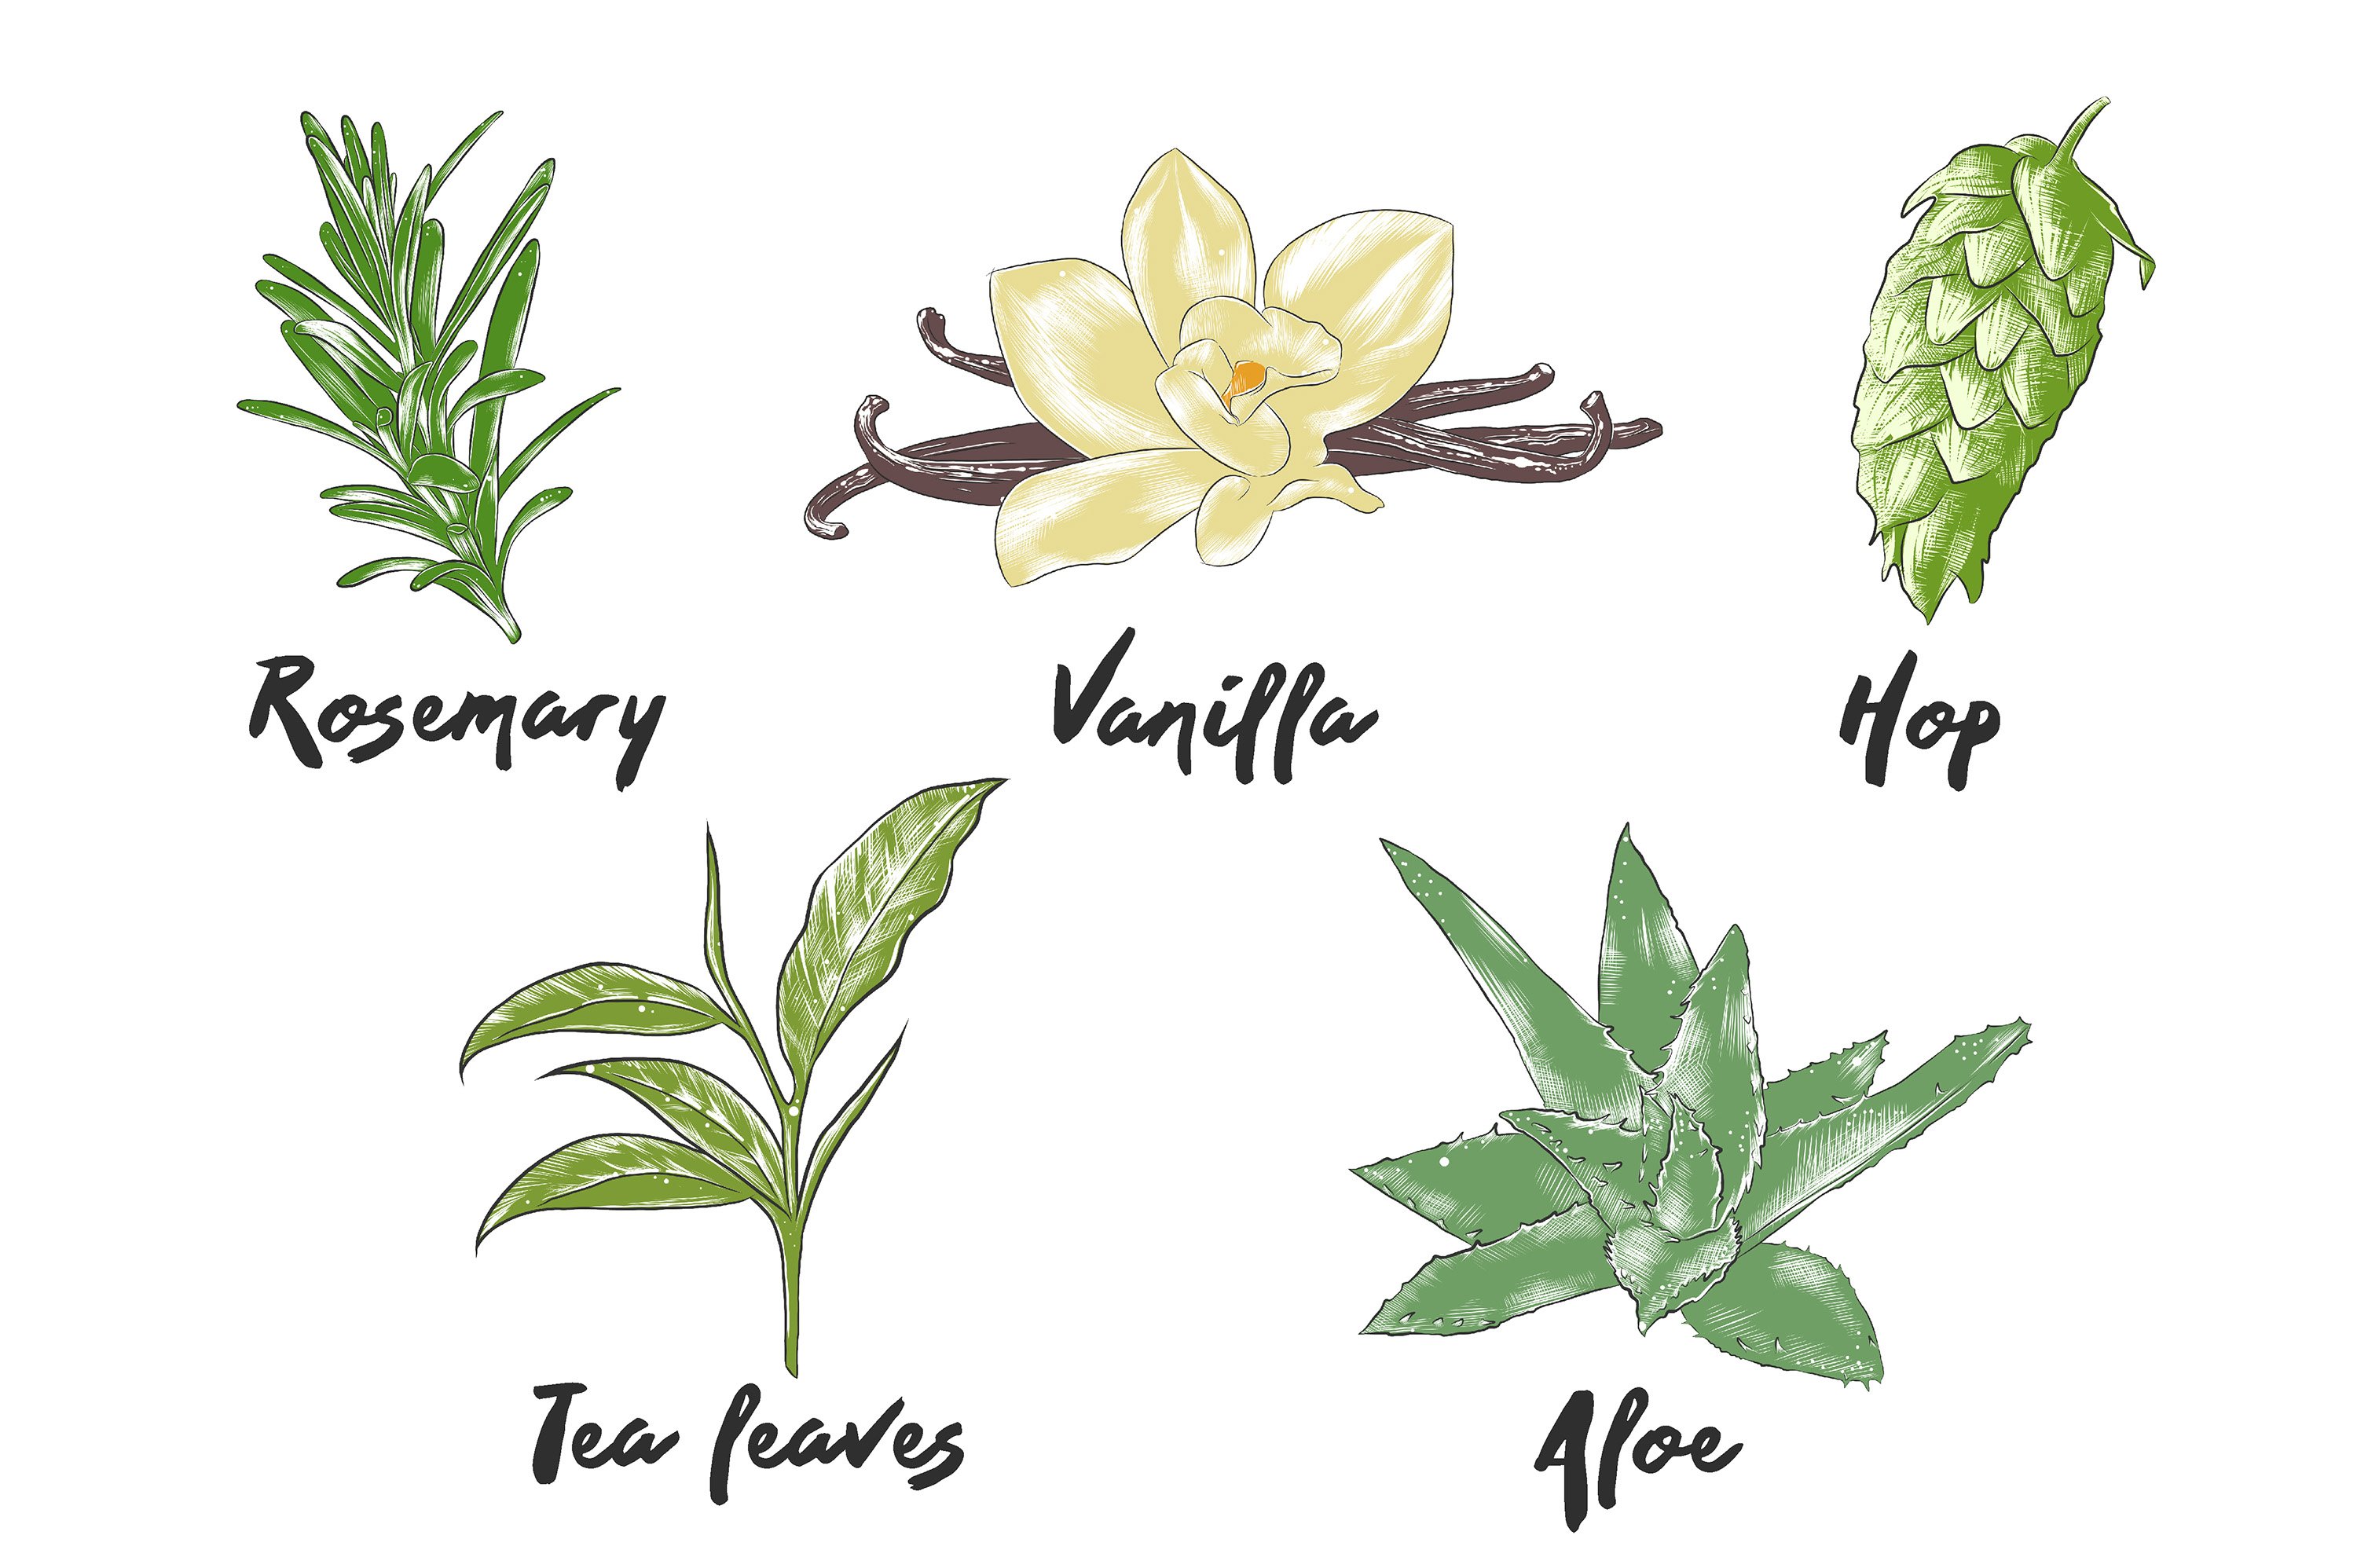 A bunch of plants that are labeled in different languages.